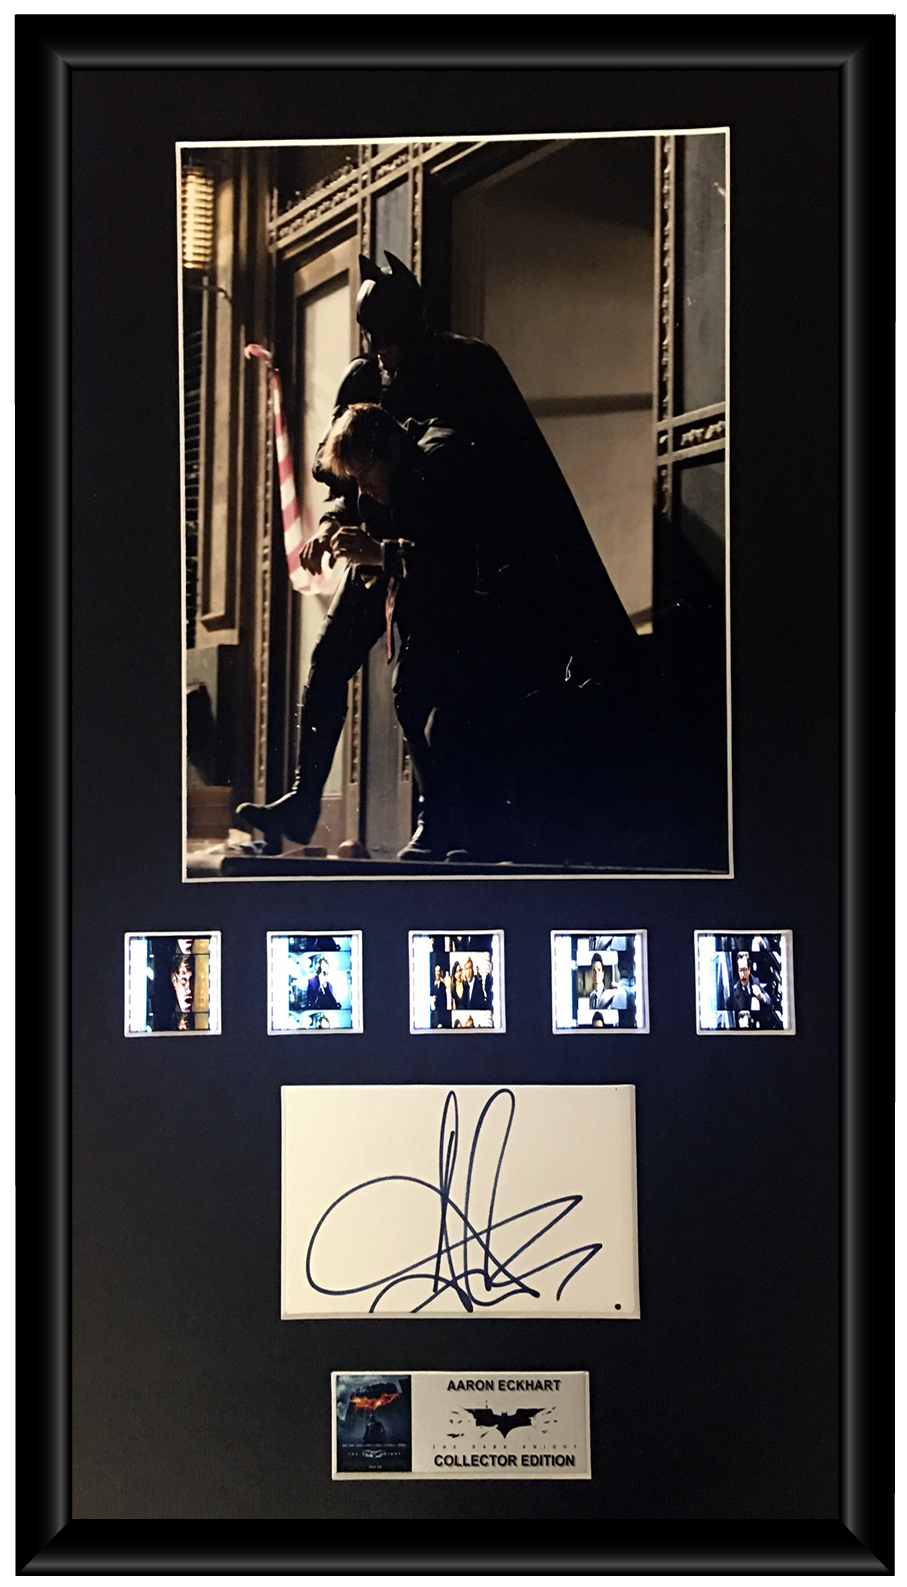 Aaron Eckhart | The Dark Knight (2008) | Autographed Film Cell Display